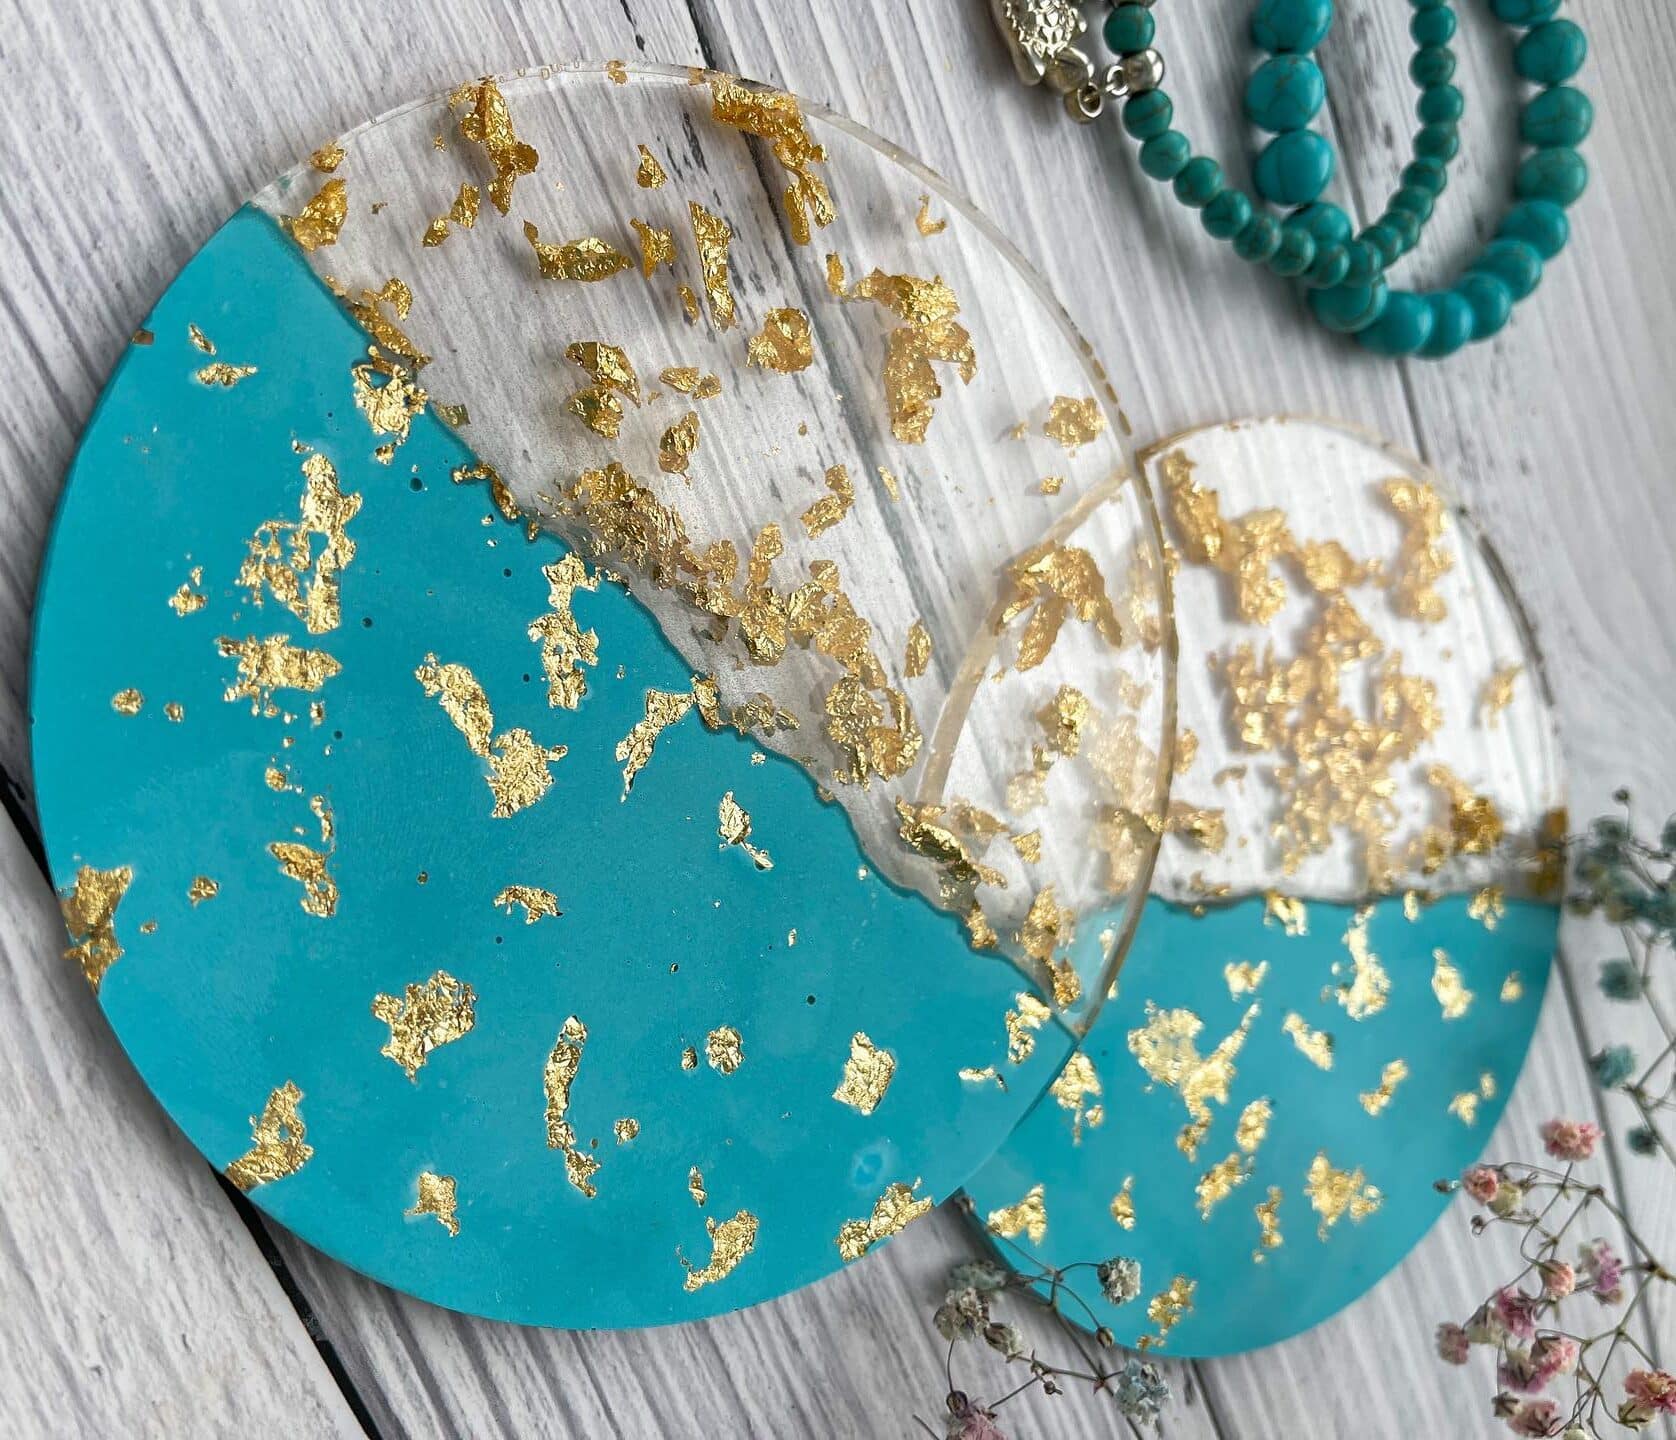 Creating Stunning Resin Coasters: A Step-by-Step Guide